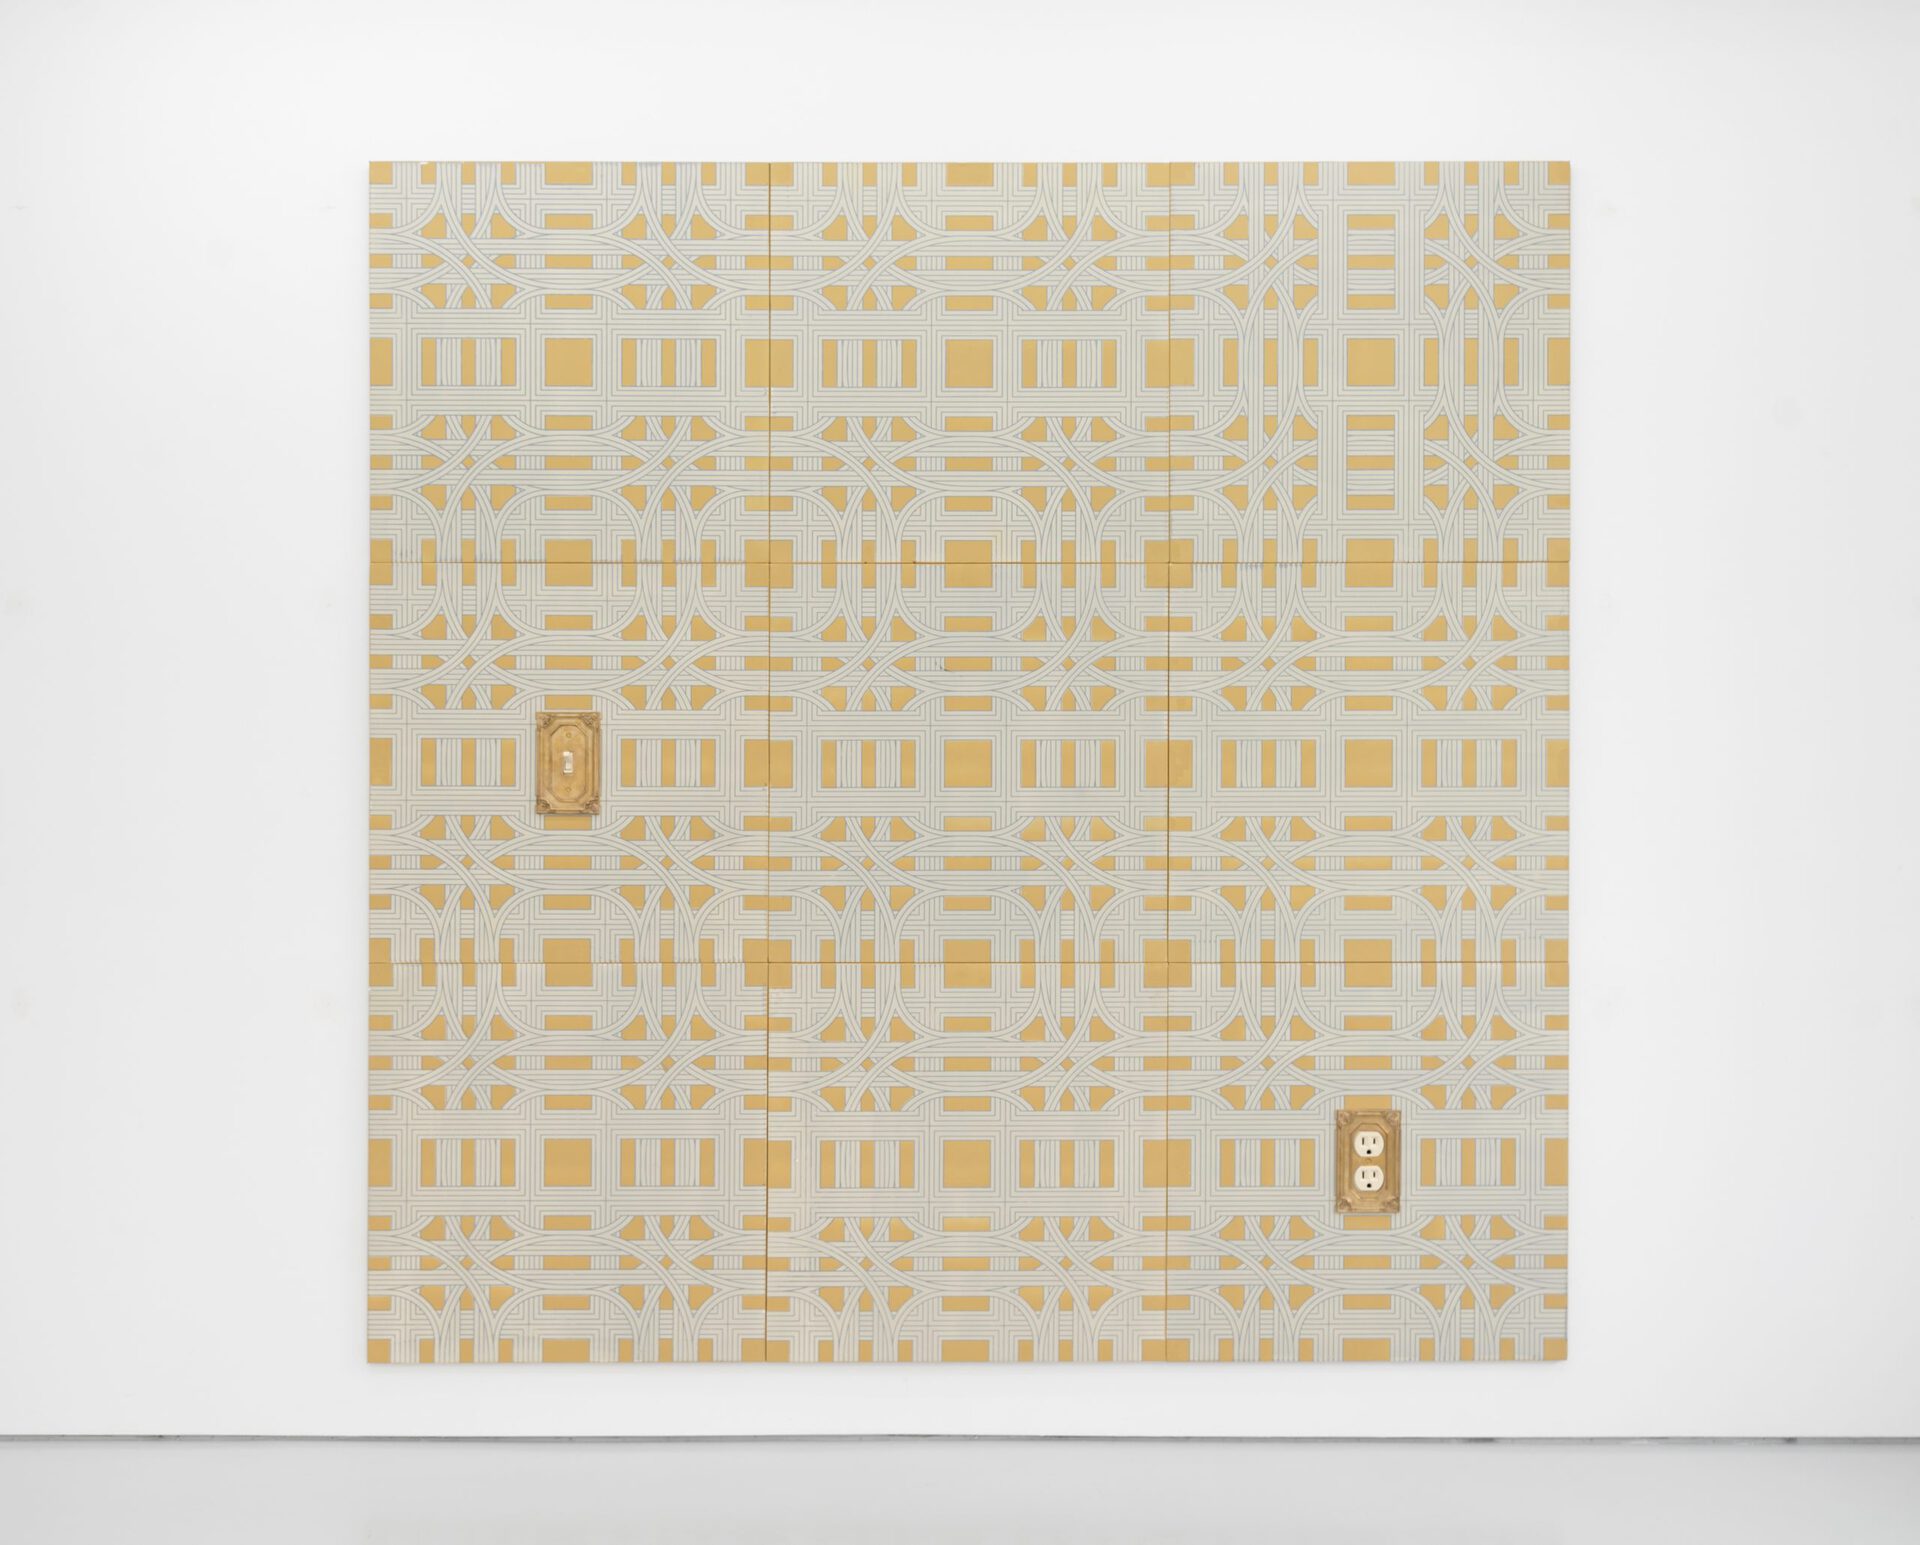 Pentti Monkkonen, Interchange Wallpaper with switch and outlet, 2021 Acrylic on canvas mounted on wood, brass, urethane 273 x 273 x 2 cm (107 1/2 x 107 1/2 x 3/4 in). Courtesy of the artist and High Art